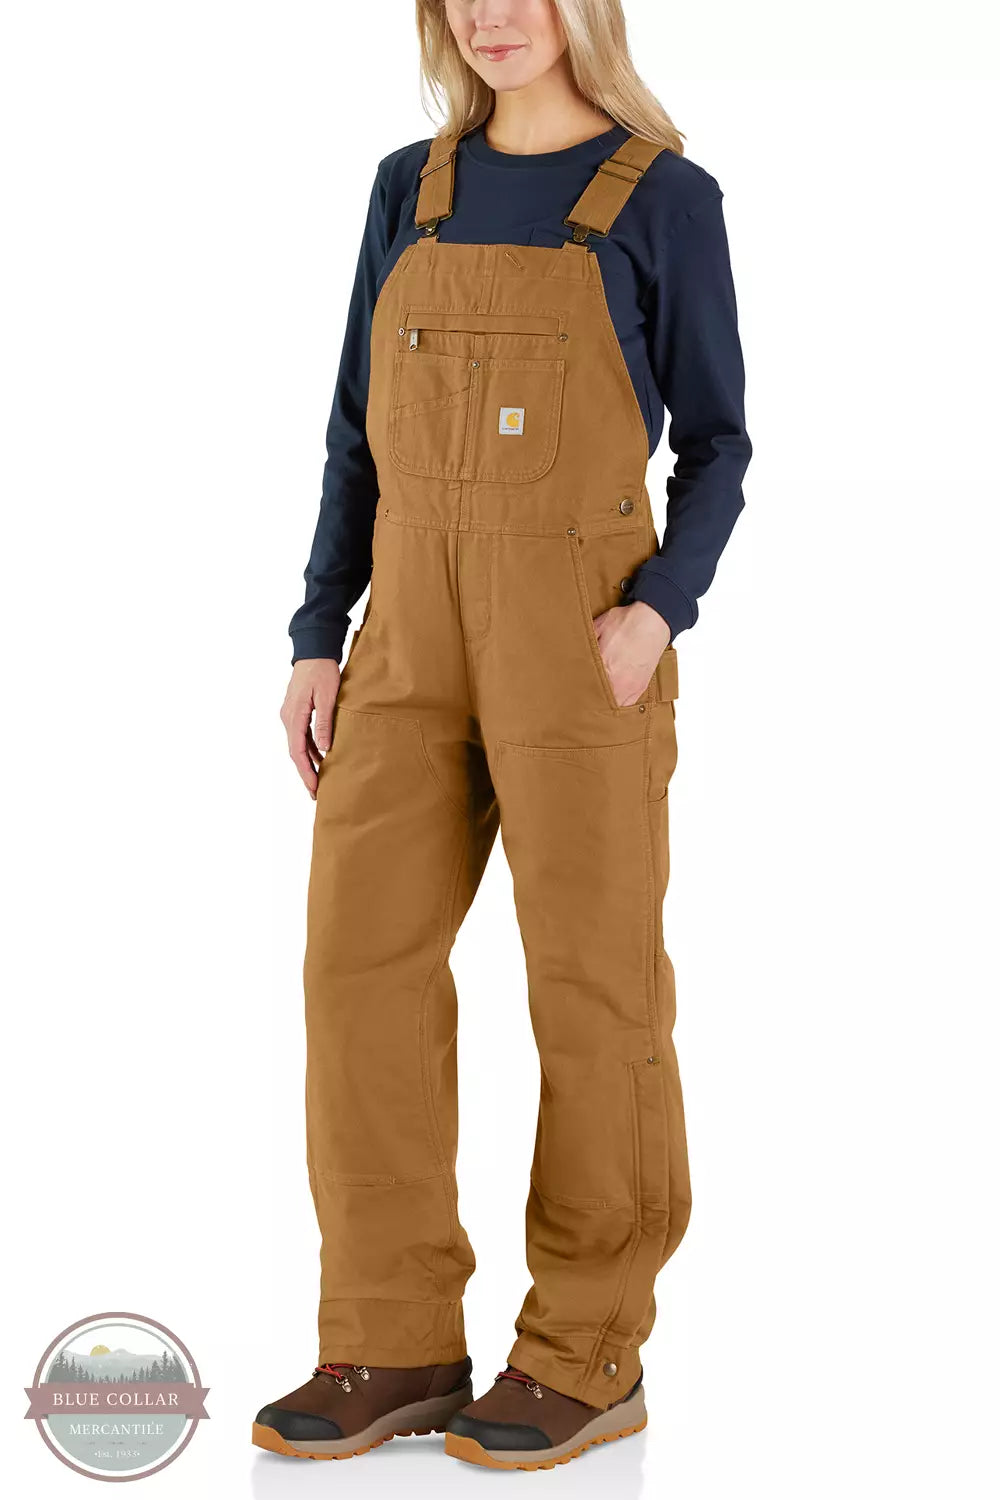  Carhartt mens Loose Fit Washed Duck Insulated Coverall,  Carhartt Brown, Small US: Clothing, Shoes & Jewelry